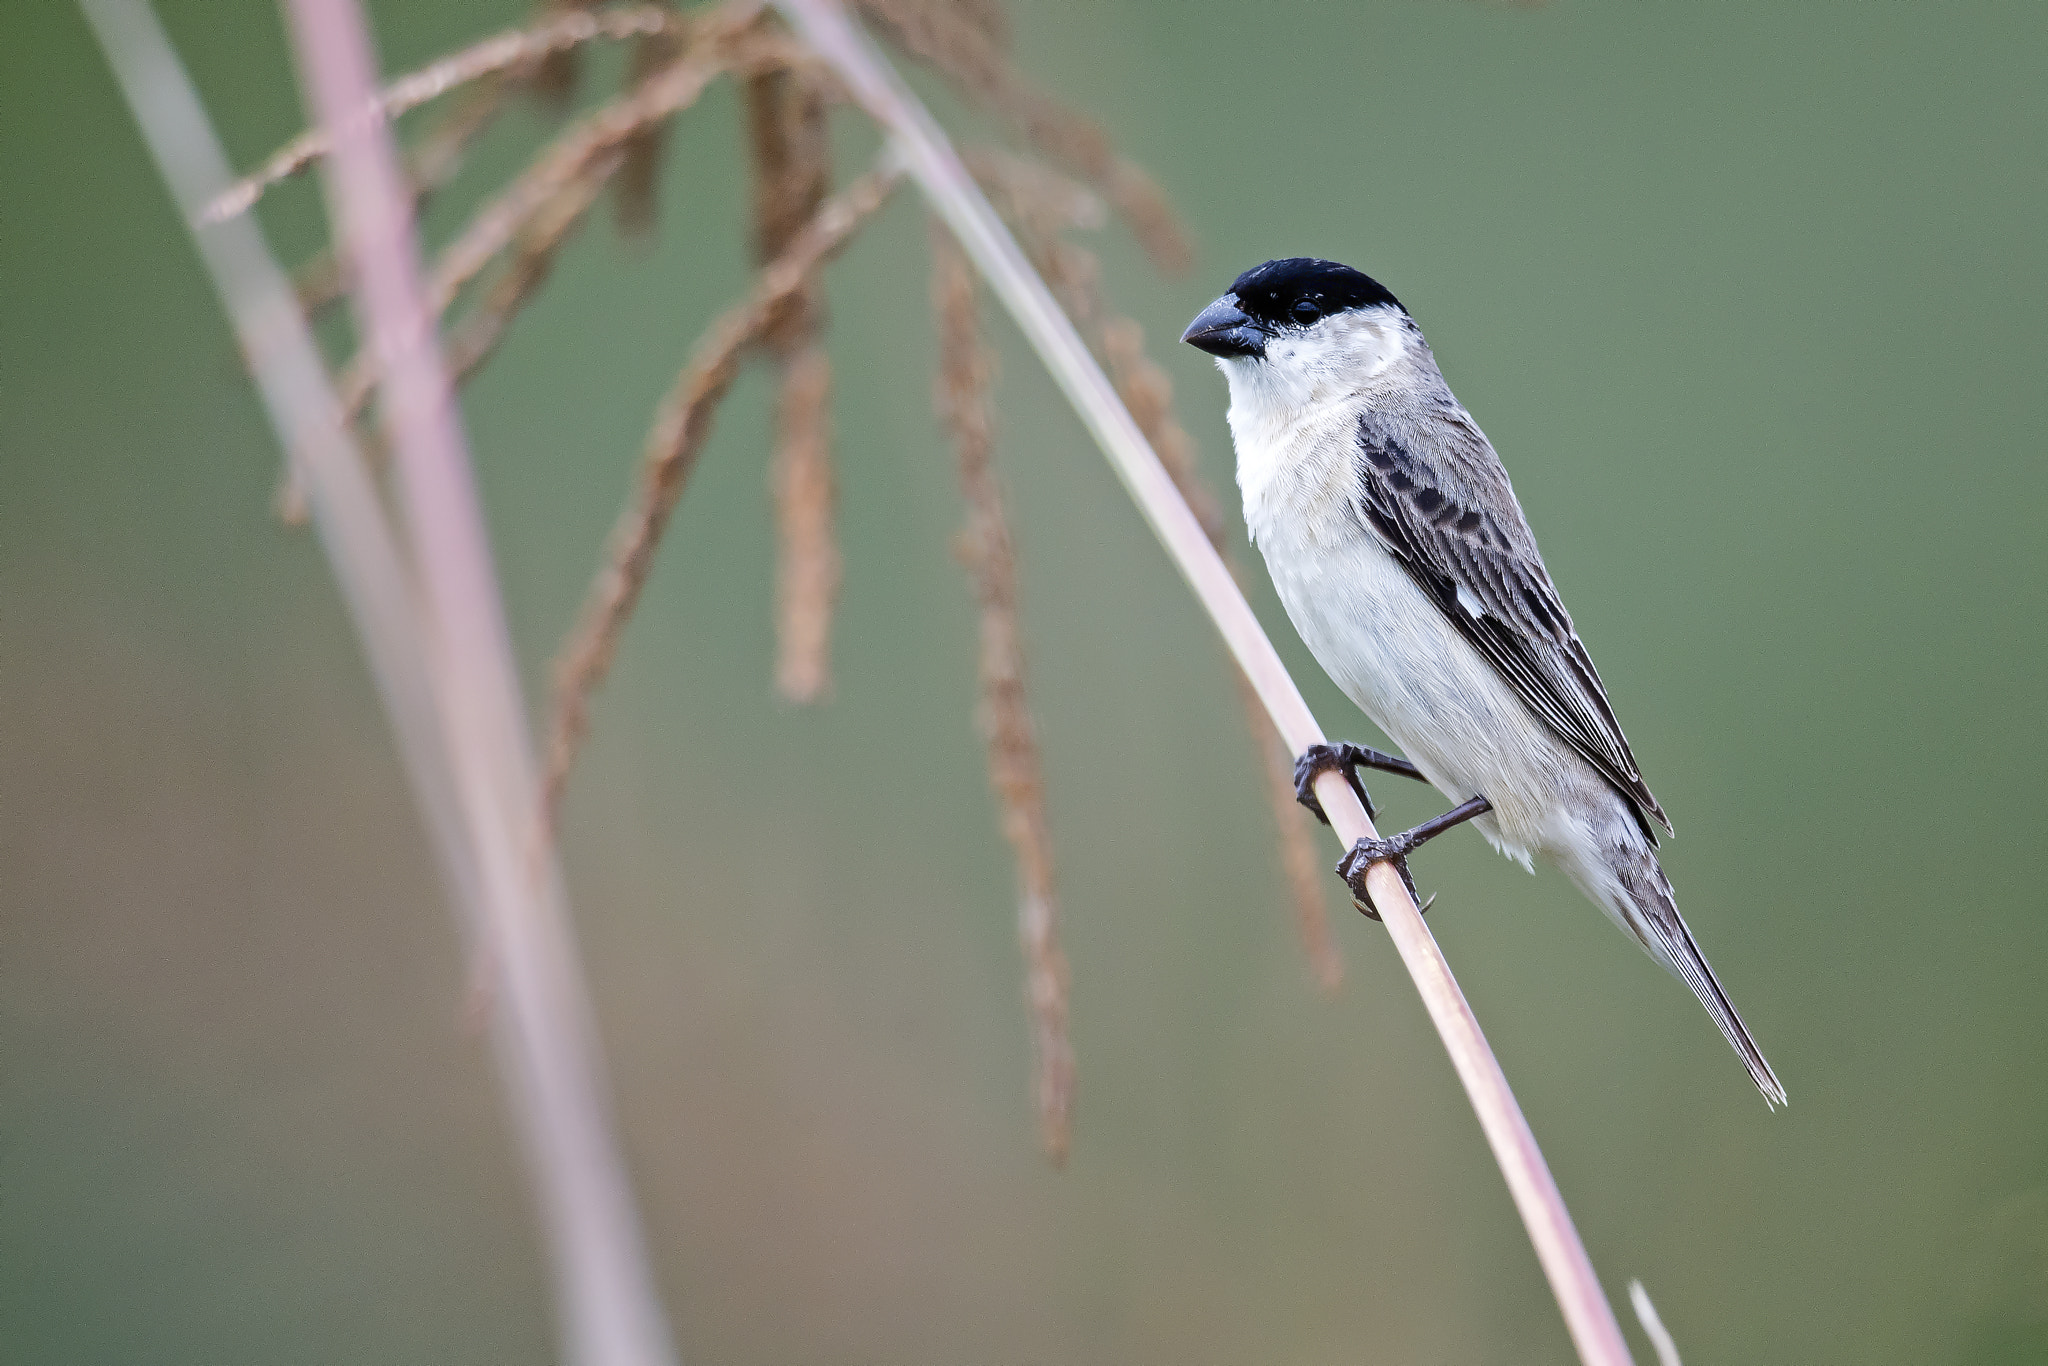 Nikon D5 sample photo. Pearly-bellied seedeater photography